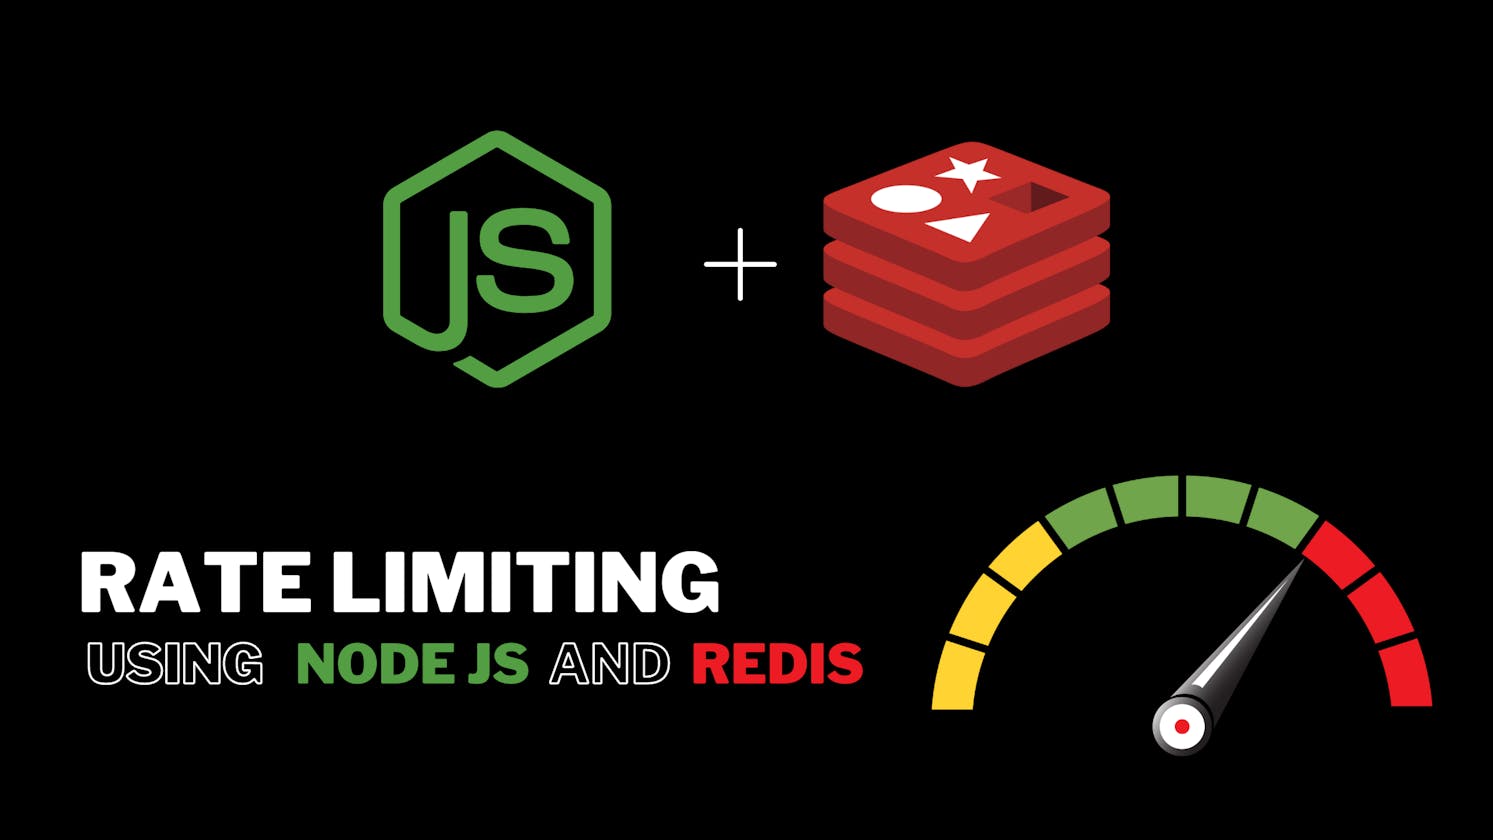 Redis-Based Rate Limiting in Node.js